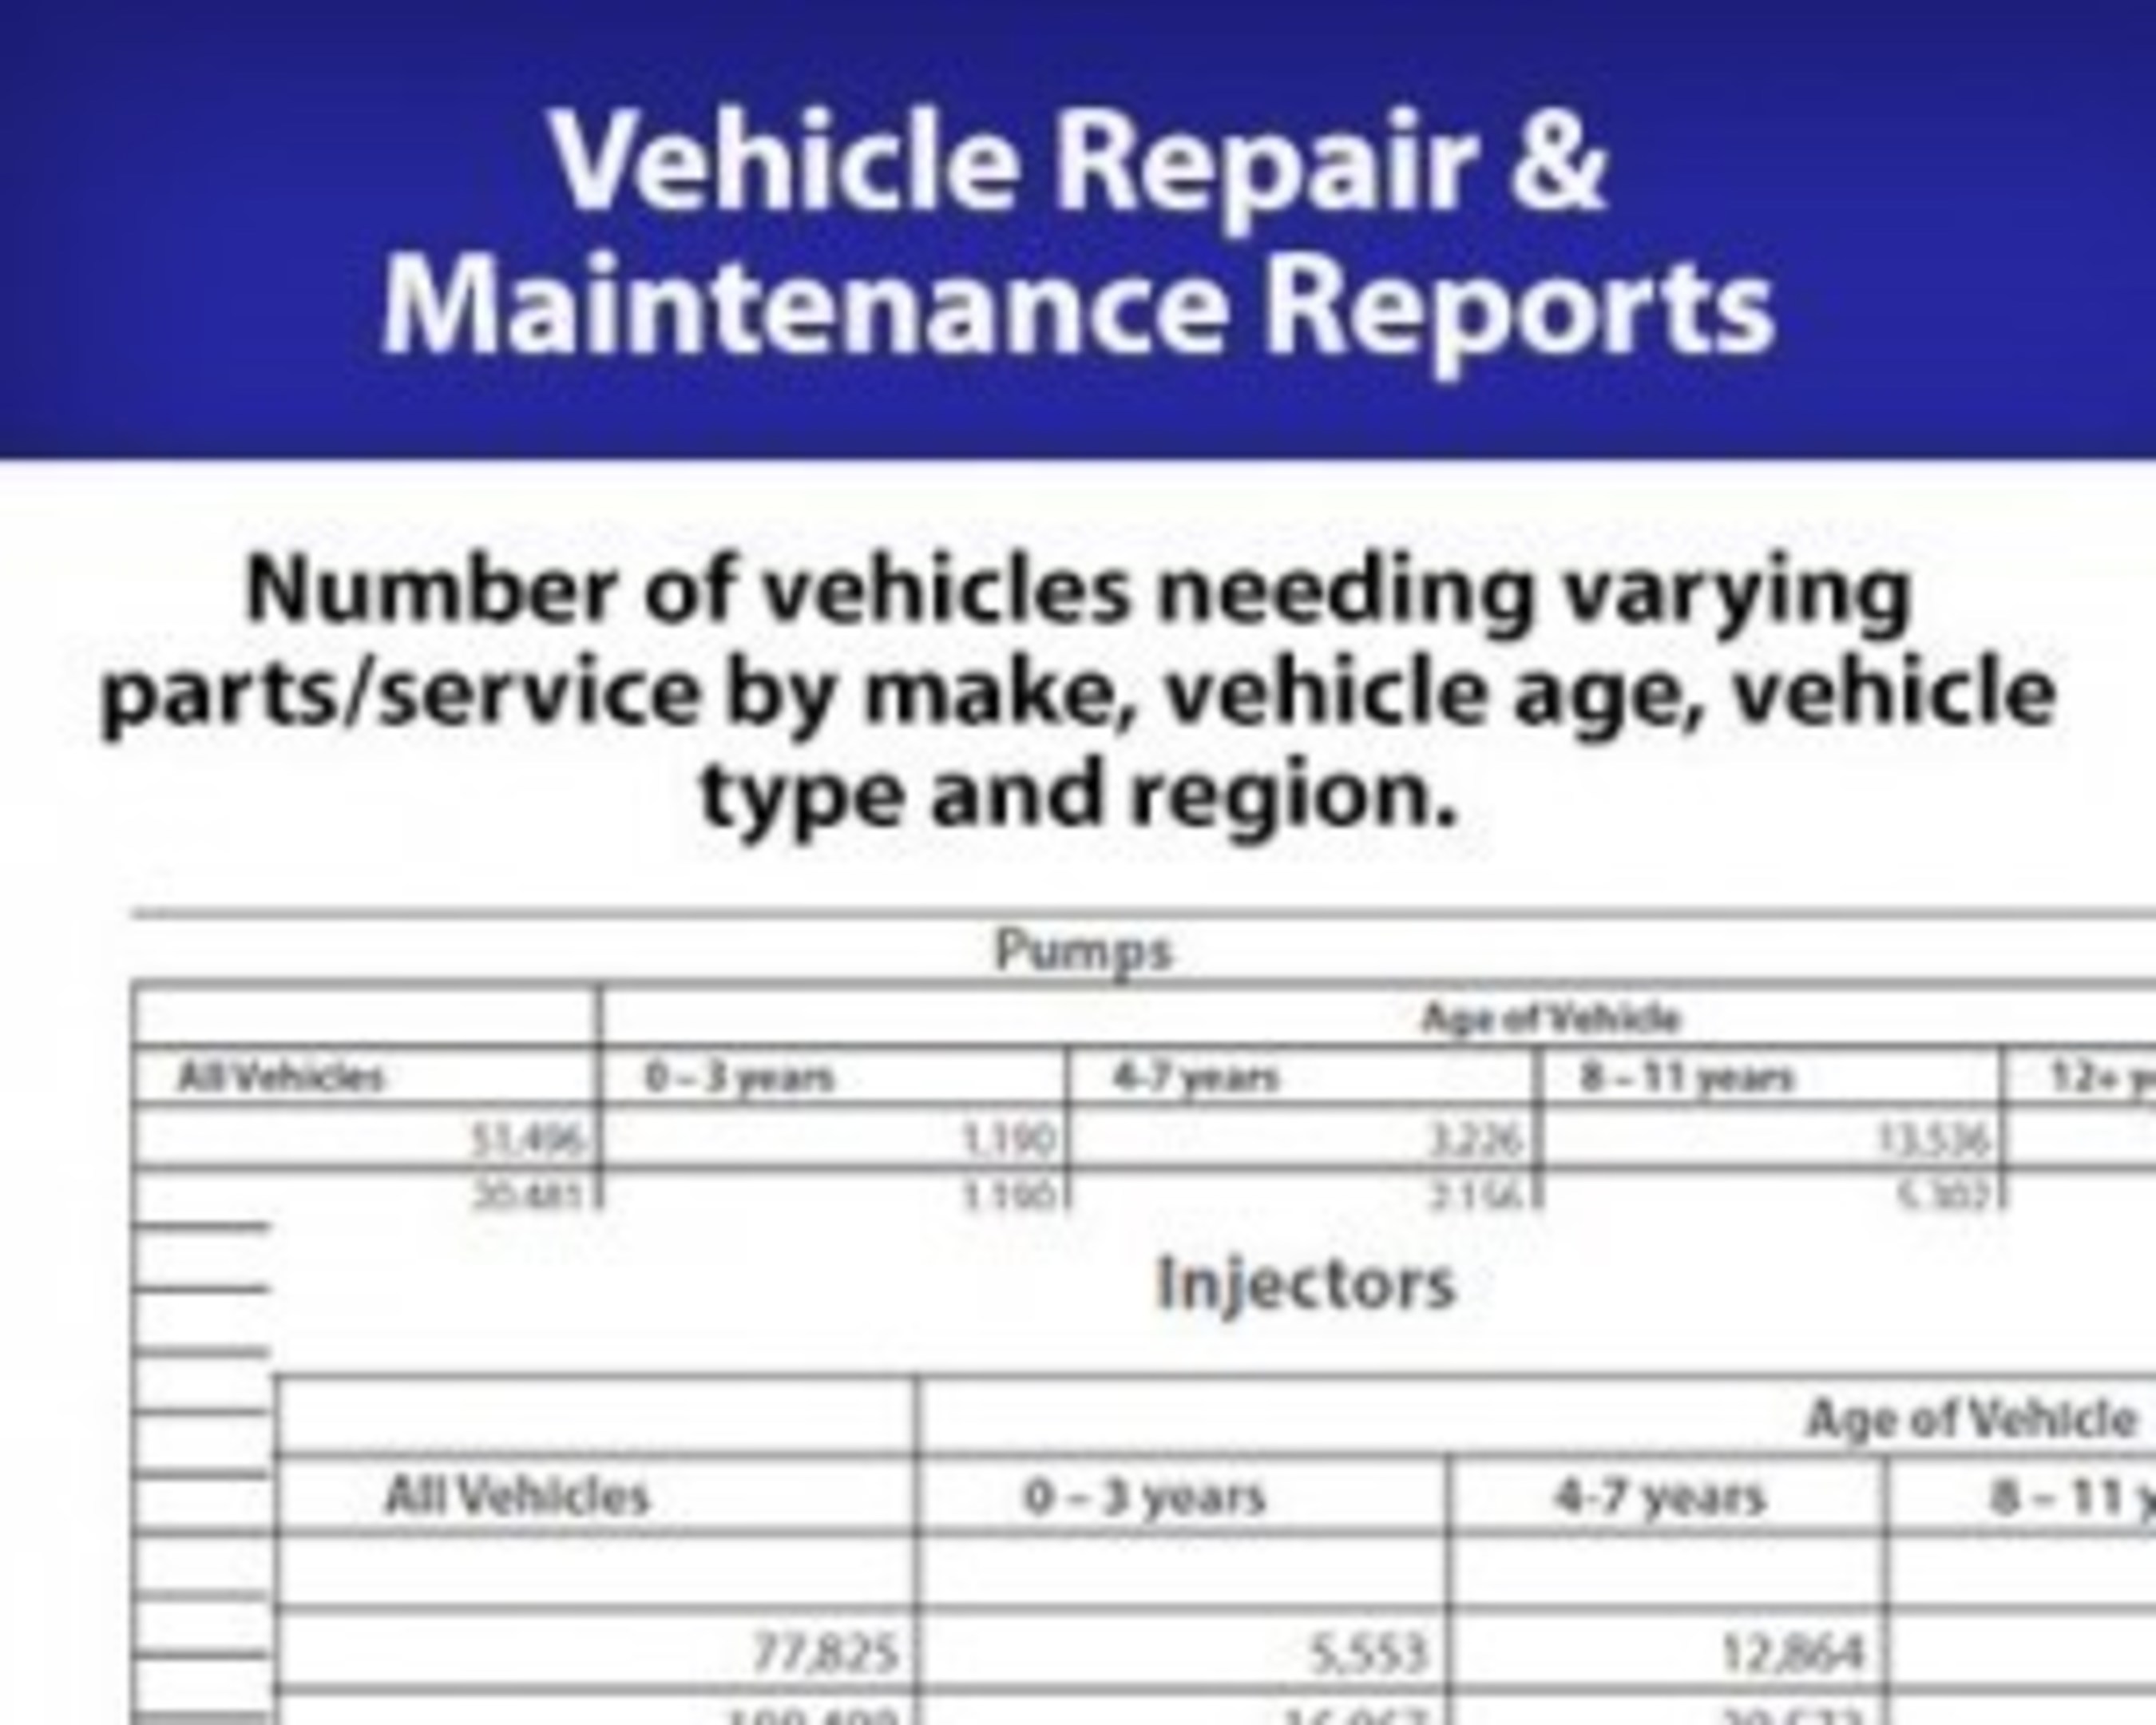 Vehicle Repair and Maintenance Reports Now Available from Hedges & Company